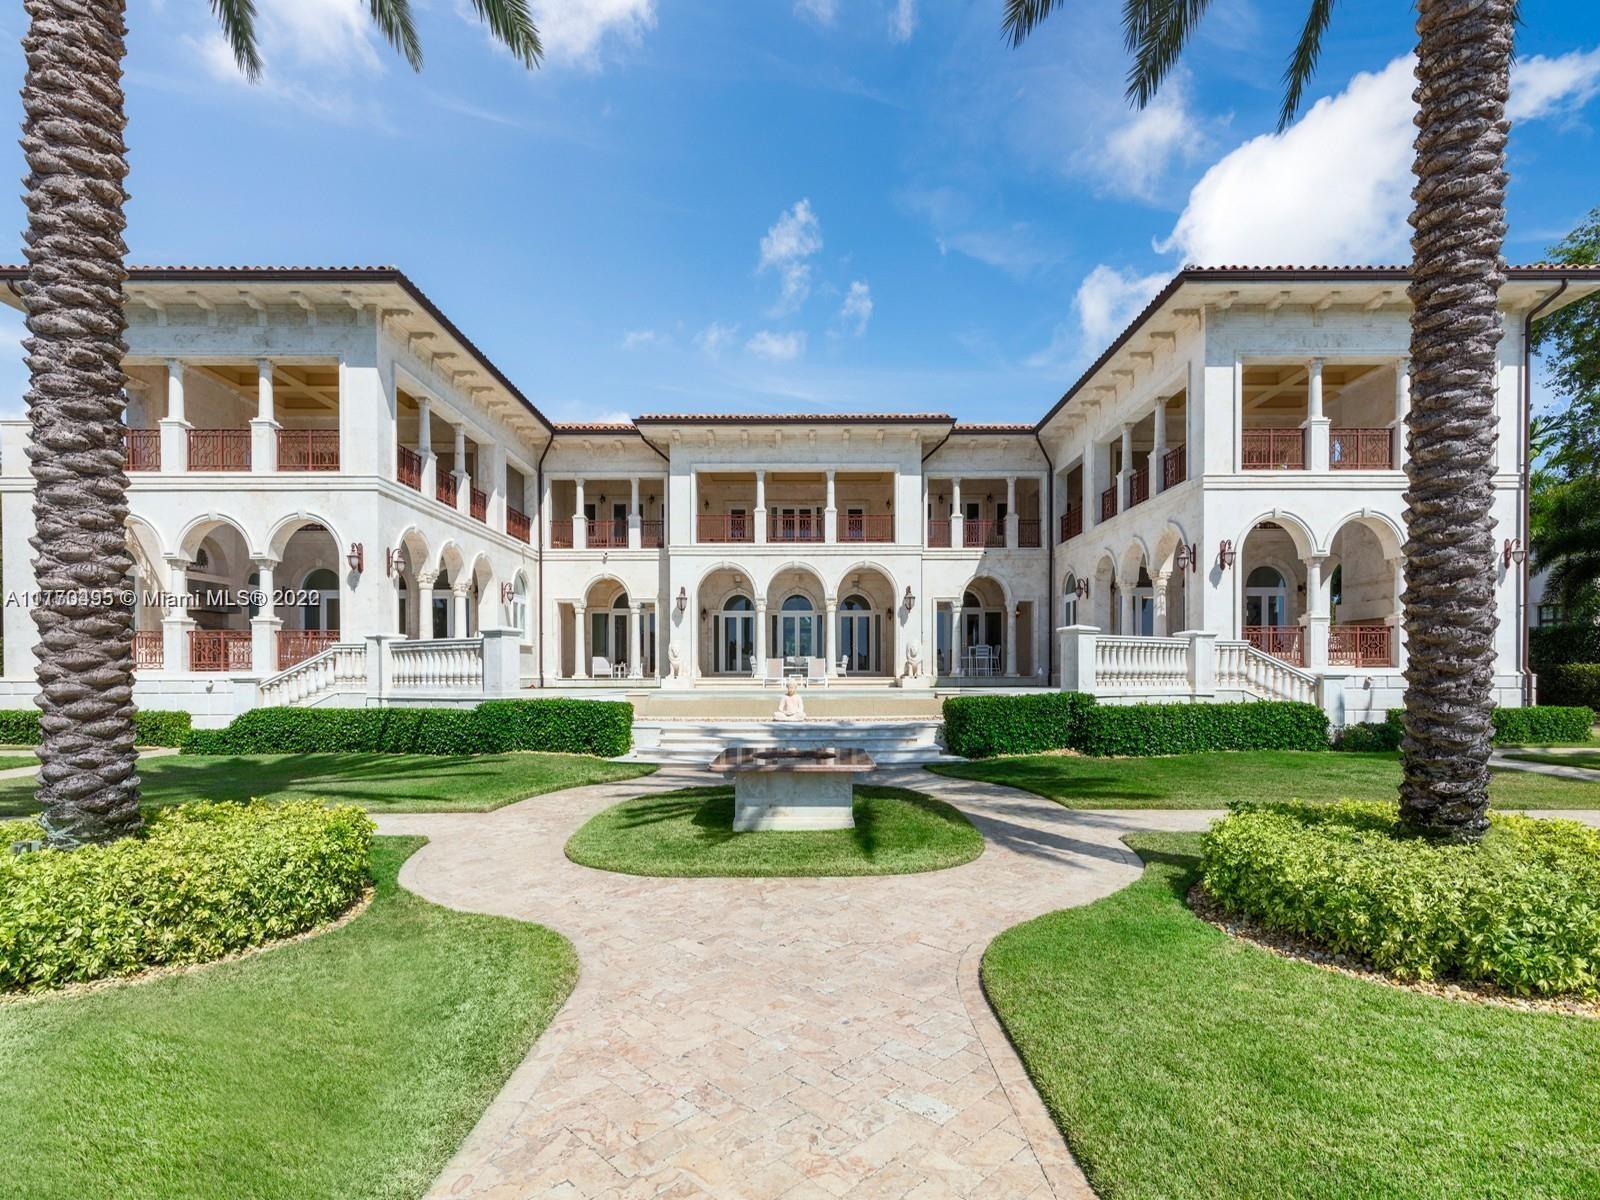 Neo-Classical Italian style villa on the widest lagoon in Gables Estates with 200 feet on the water and 140 foot dock. 8 bedrooms, 9 baths, 5 HB, library/office, gym, and 600 bottle custom wine cellar fill this 18,073 total SF palatial estate. Marble veneer walls, custom carved stone elements, & Venetian Plaster throughout. Over 4,000 SF of expansive covered terraces are ideal for entertaining. Large primary suite with his/her baths and walk in closets, custom crafted chefs kitchen open to the large family room and secondary office. Butler’s pantry and 2 bedroom staff quarter, this estate checks off all the boxes!